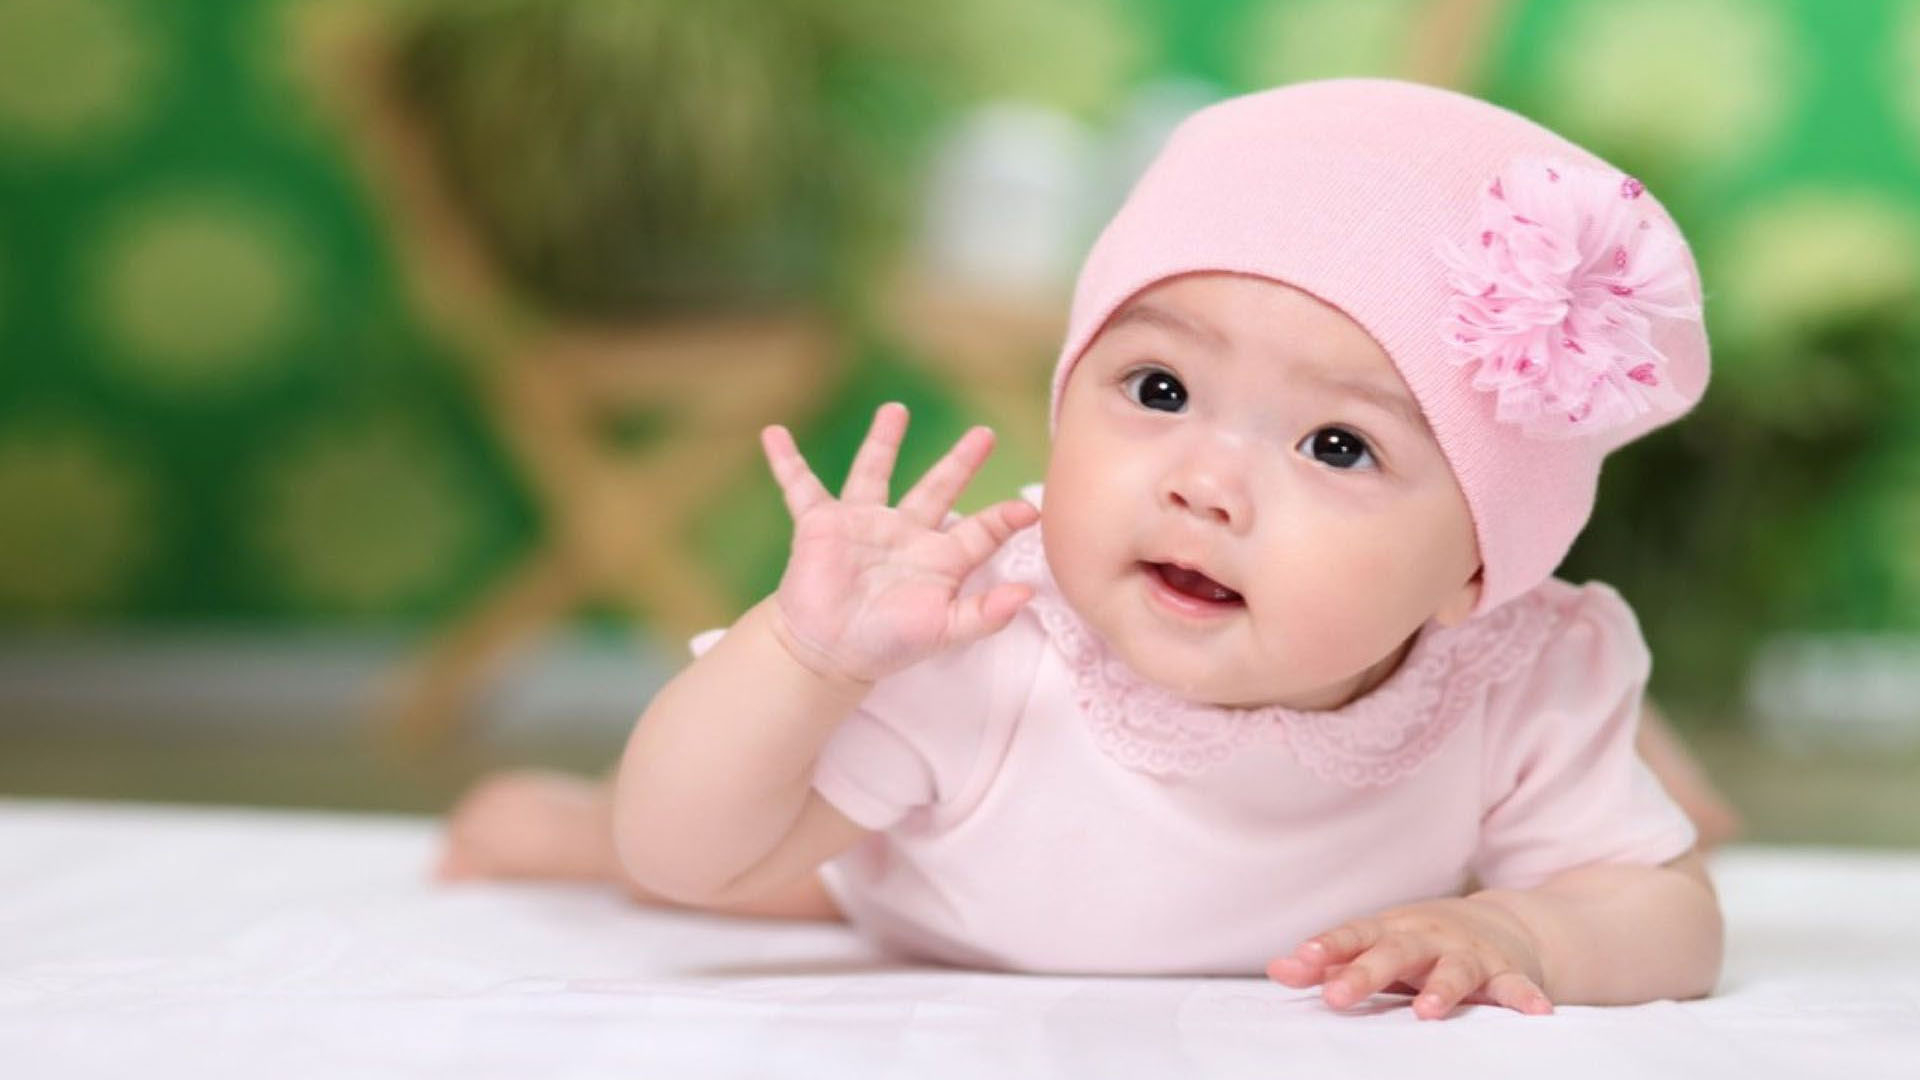 Cute Baby Wallpapers - Wallpaper Cave